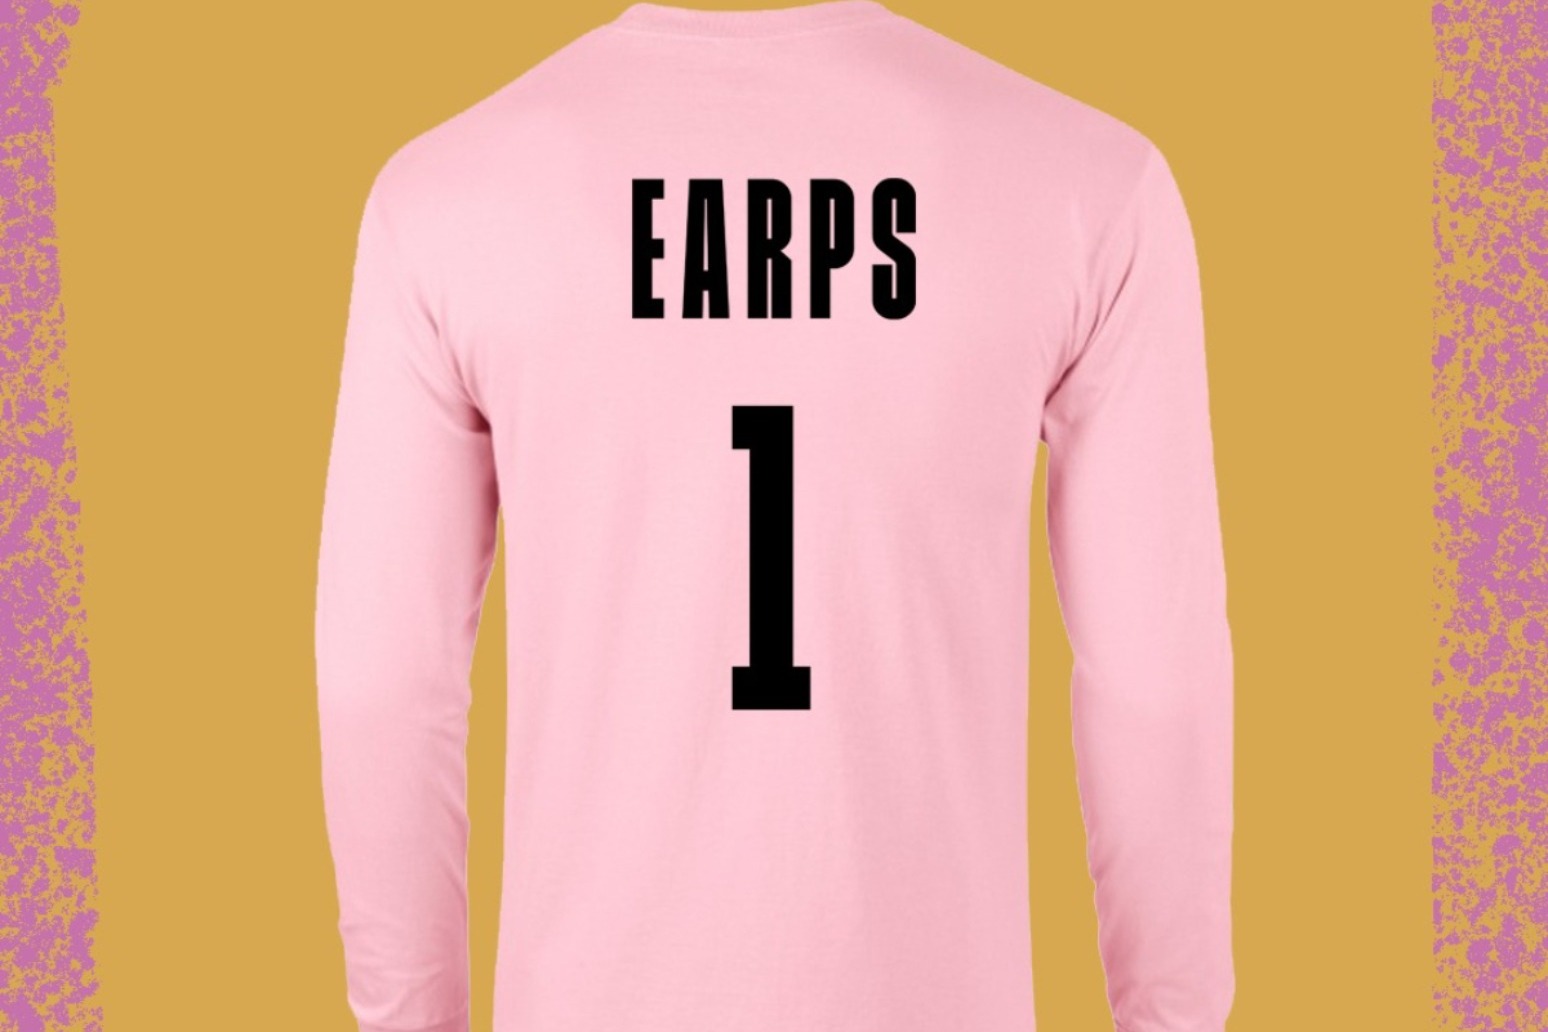 Mary Earps replica shirts to finally be sold in ‘limited quantities’ 